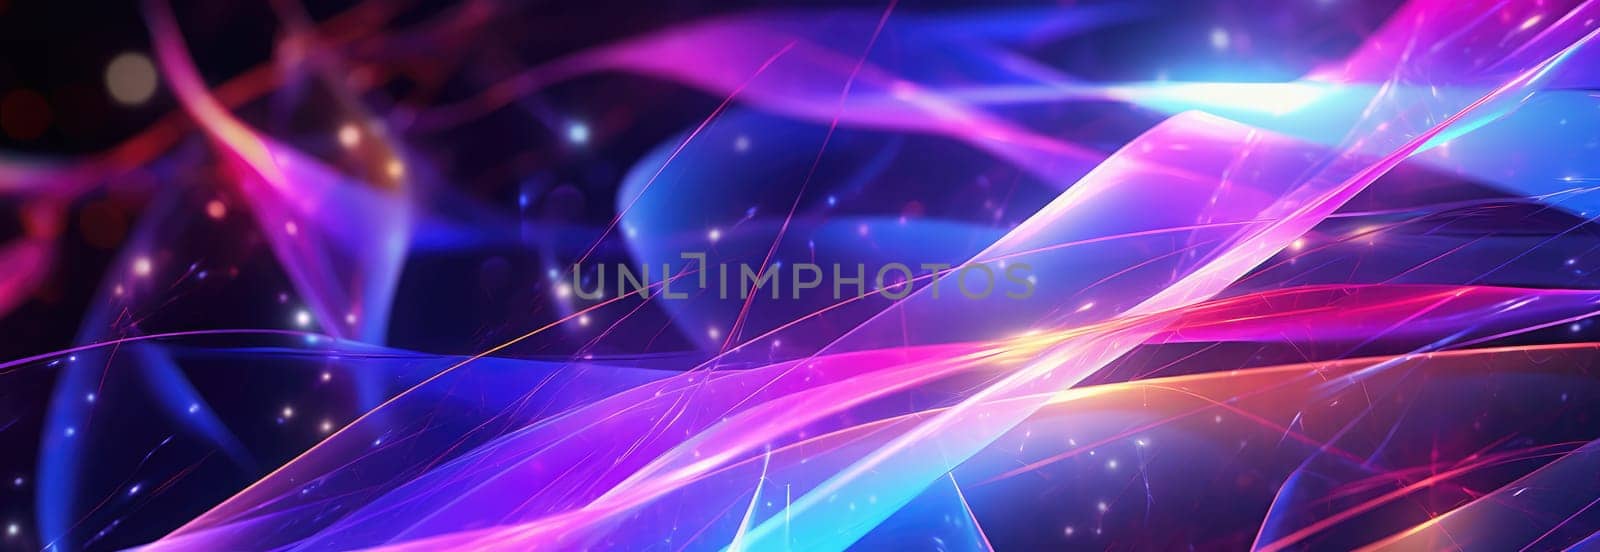 Glowing lines in bright neon colours on a dark background by palinchak